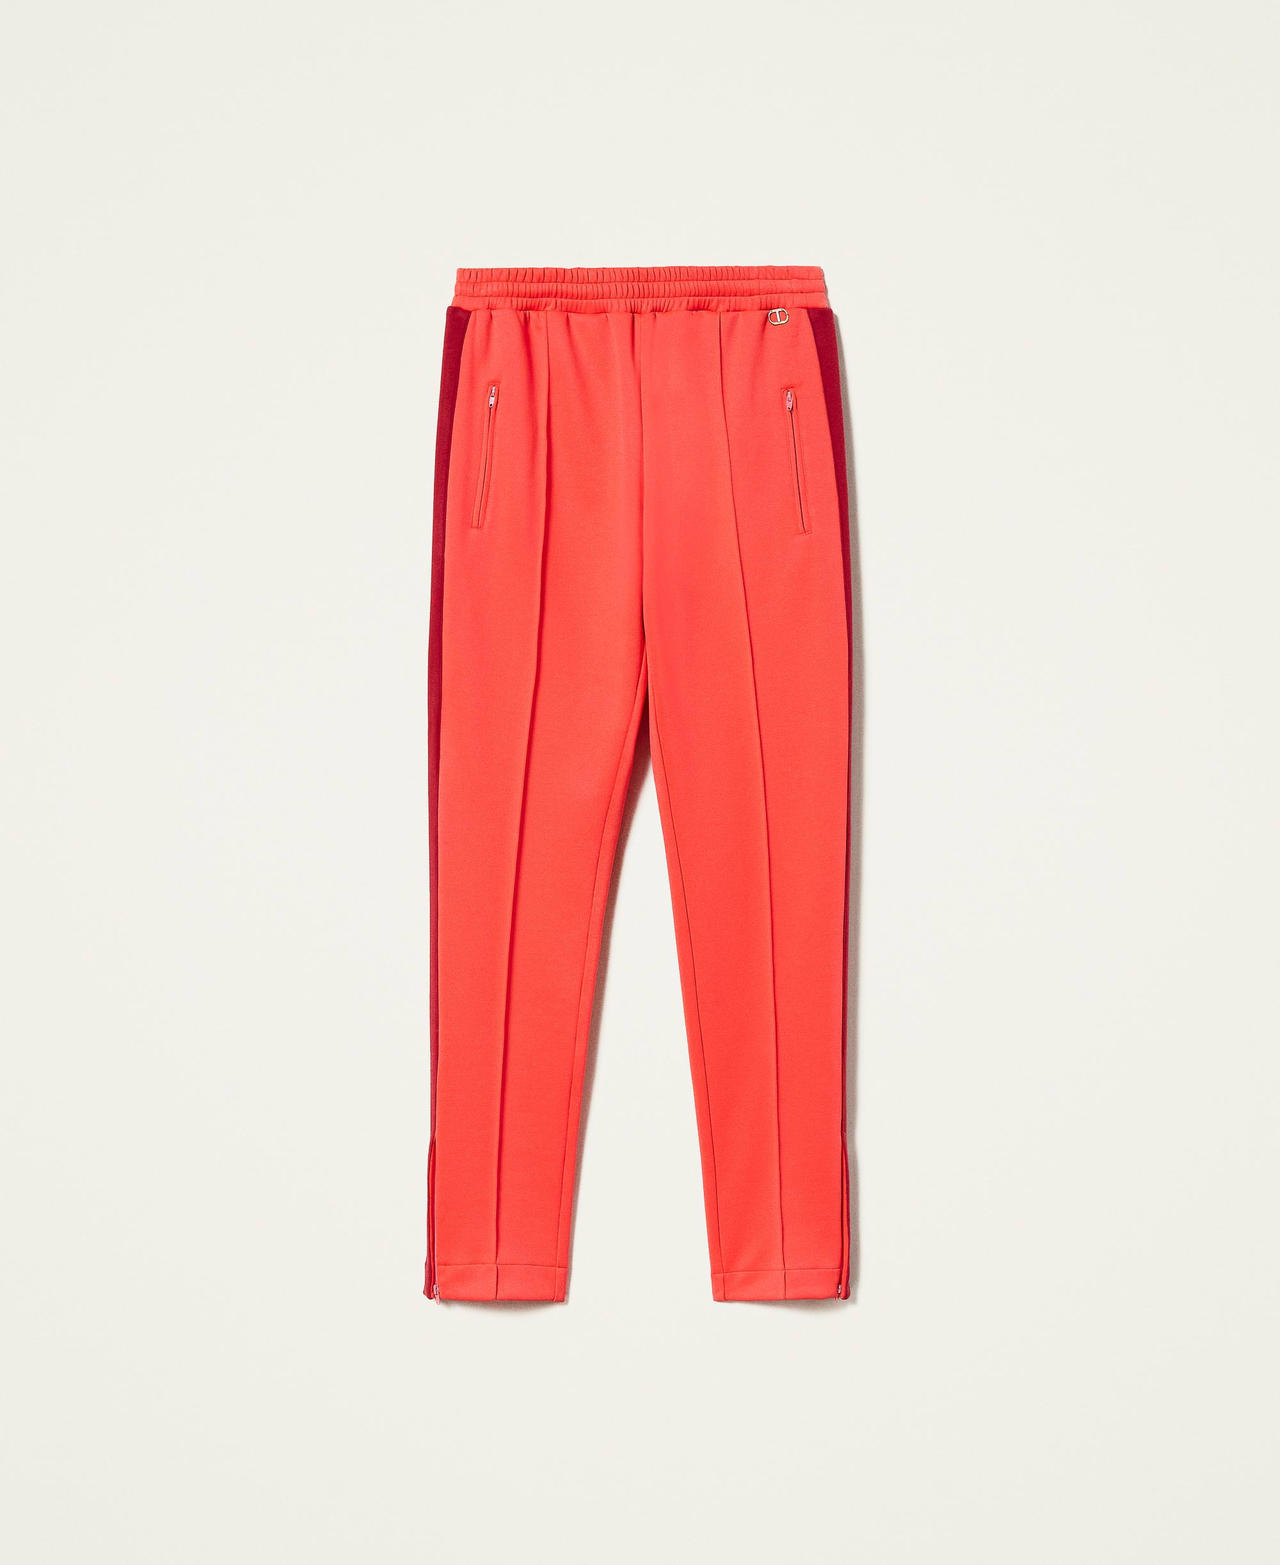 Cigarette trousers with side bands Two-tone Coral Candy / Dark Raspberry Woman 212TT2360-0S